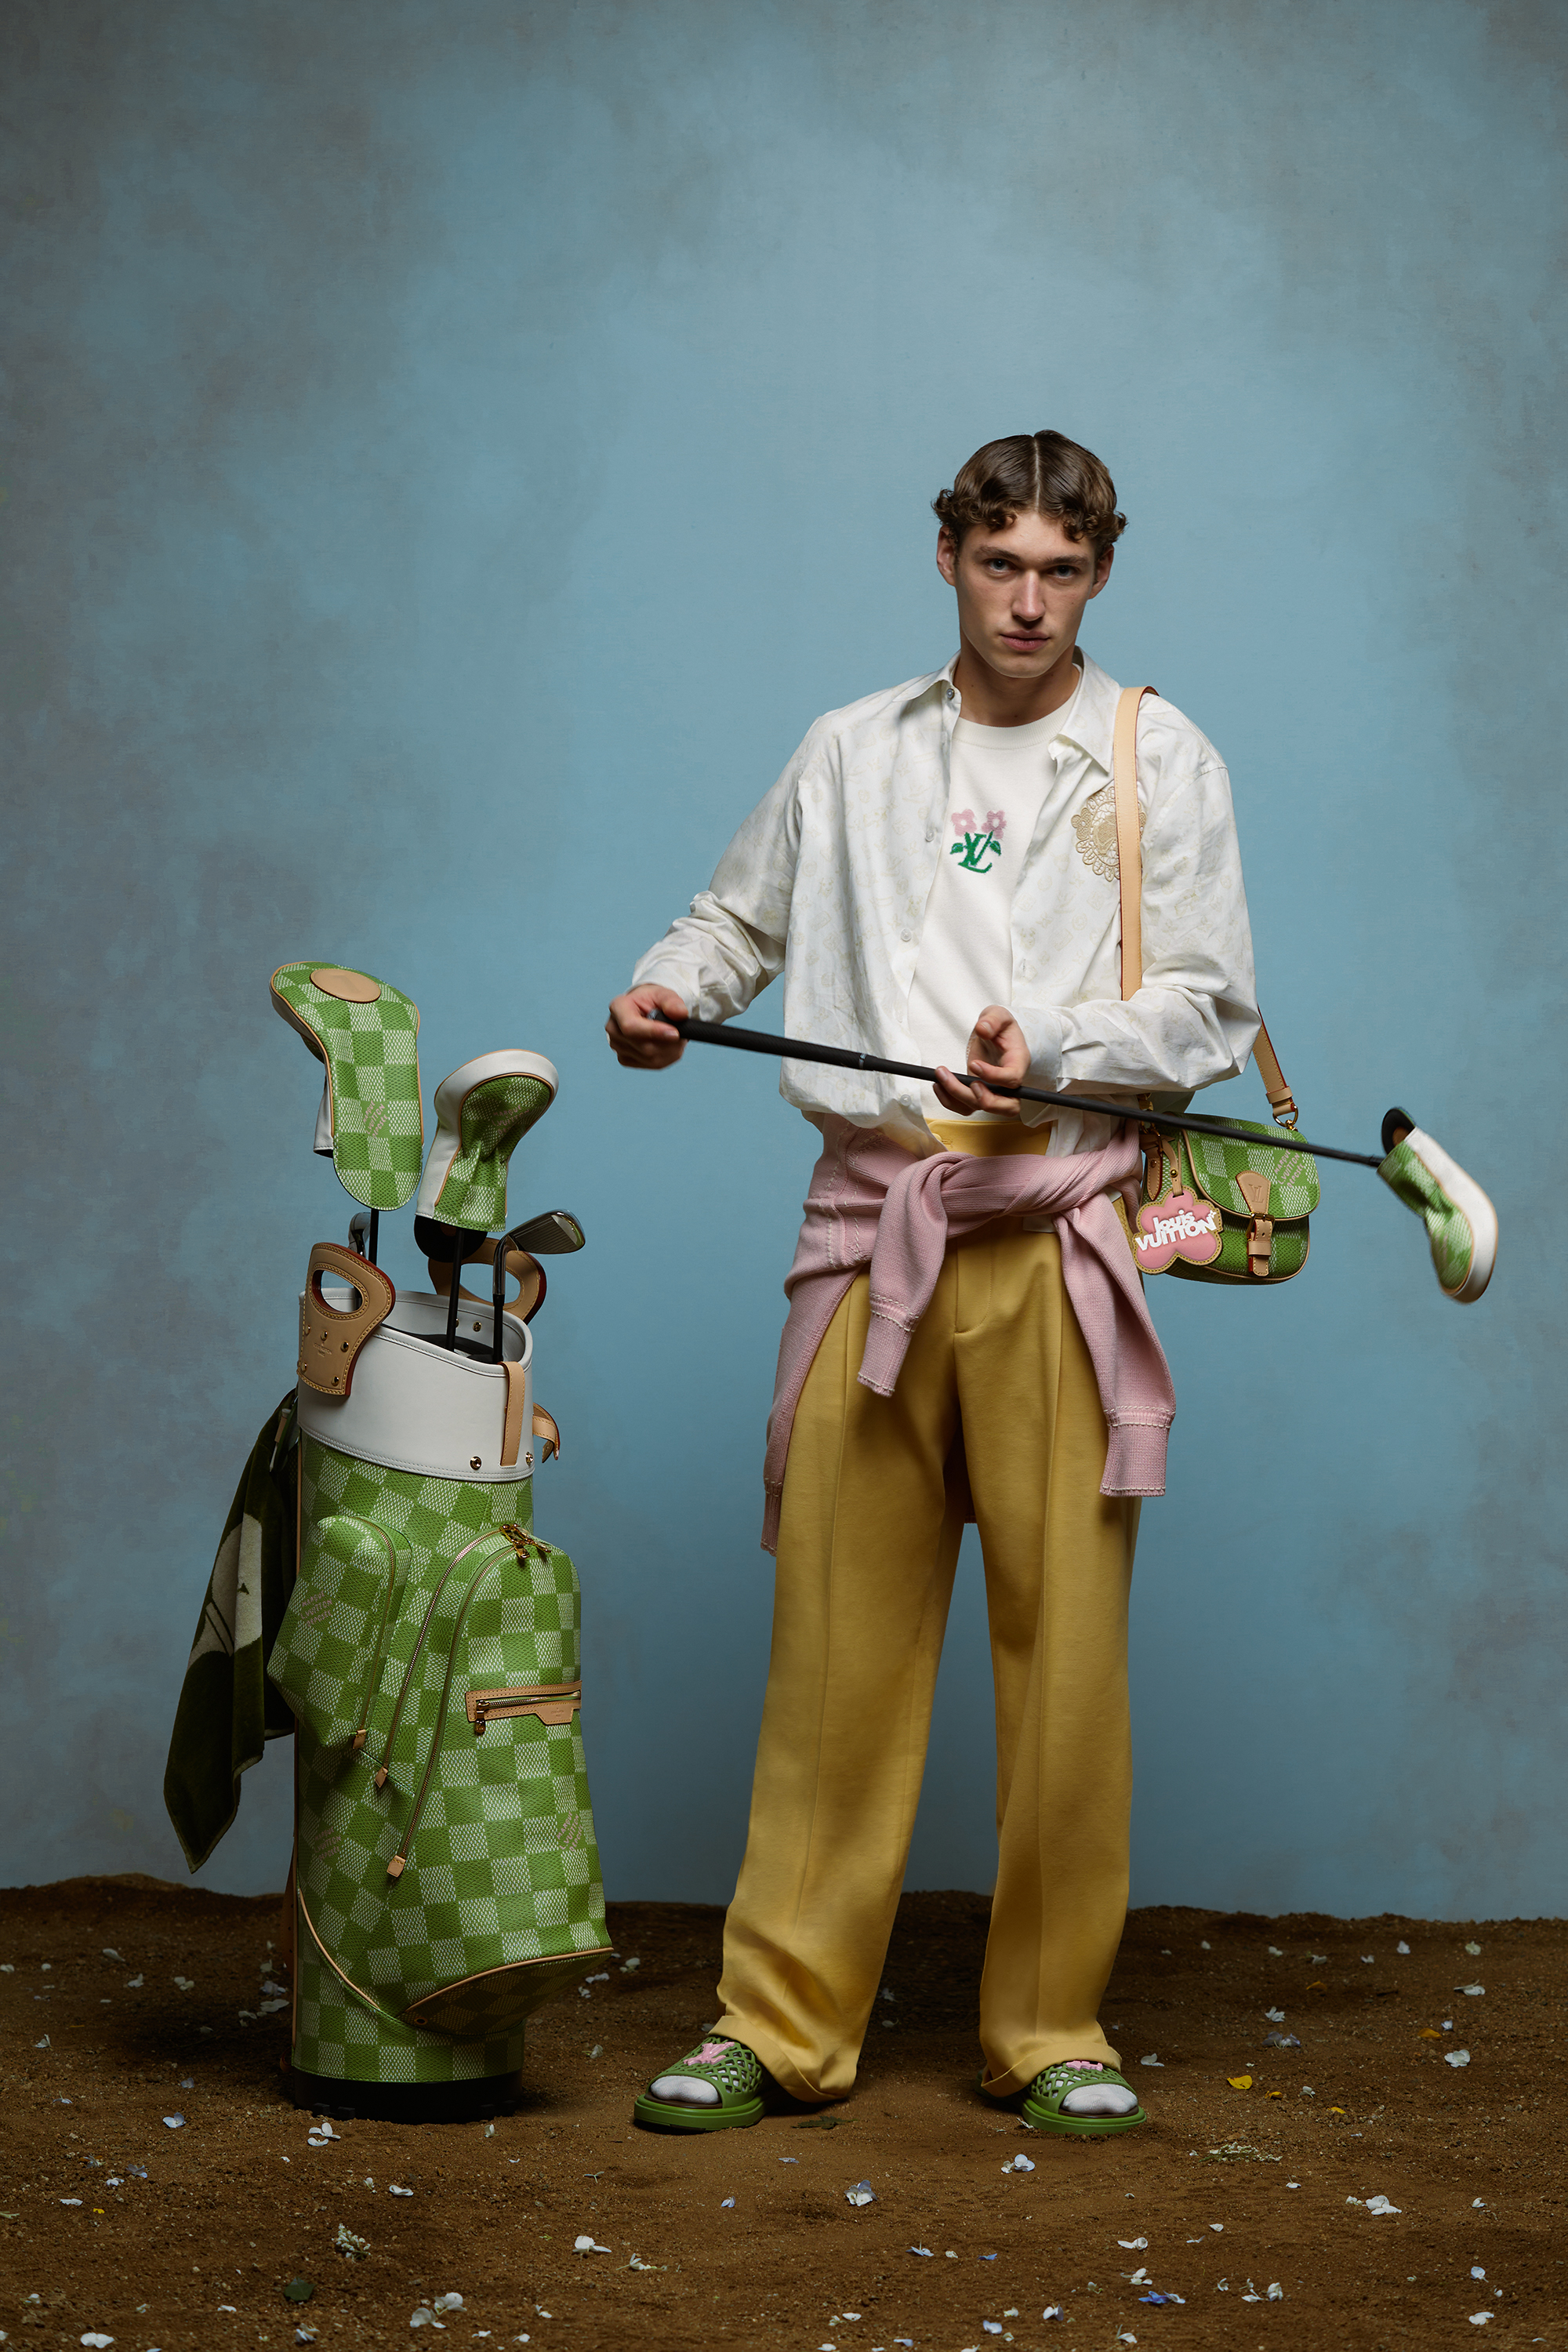 Person in eclectic outfit with golf bag, floral embroidery on shirt, pastel sash, and sandals